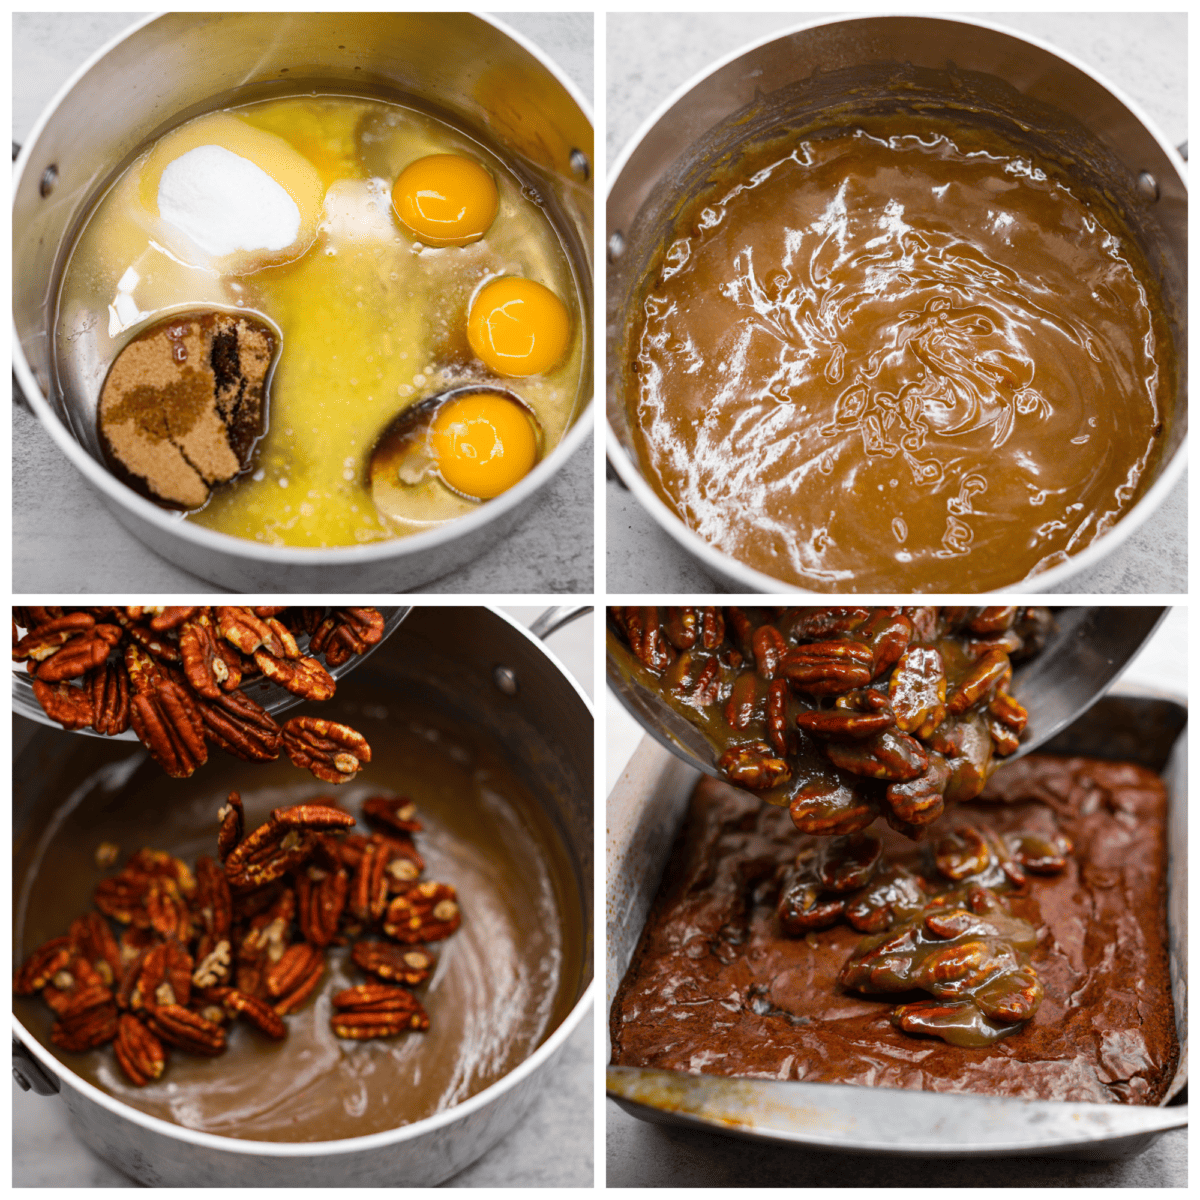 4-photo collage of the pecan glaze being prepared.